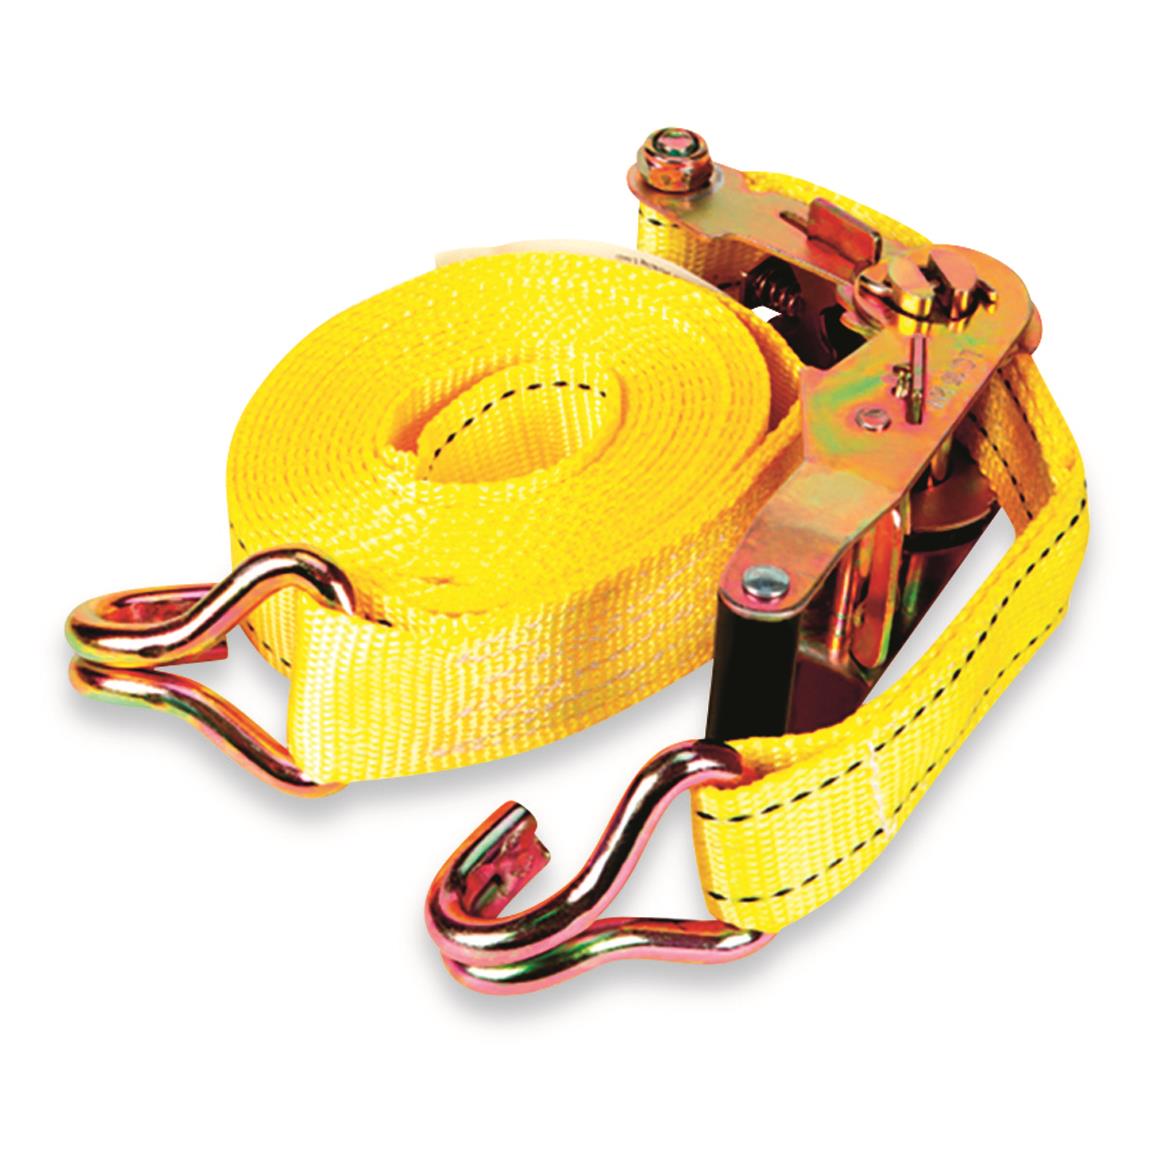 PCA-1256 Portable Winch Medium Rope Bag with Shoulder Straps 